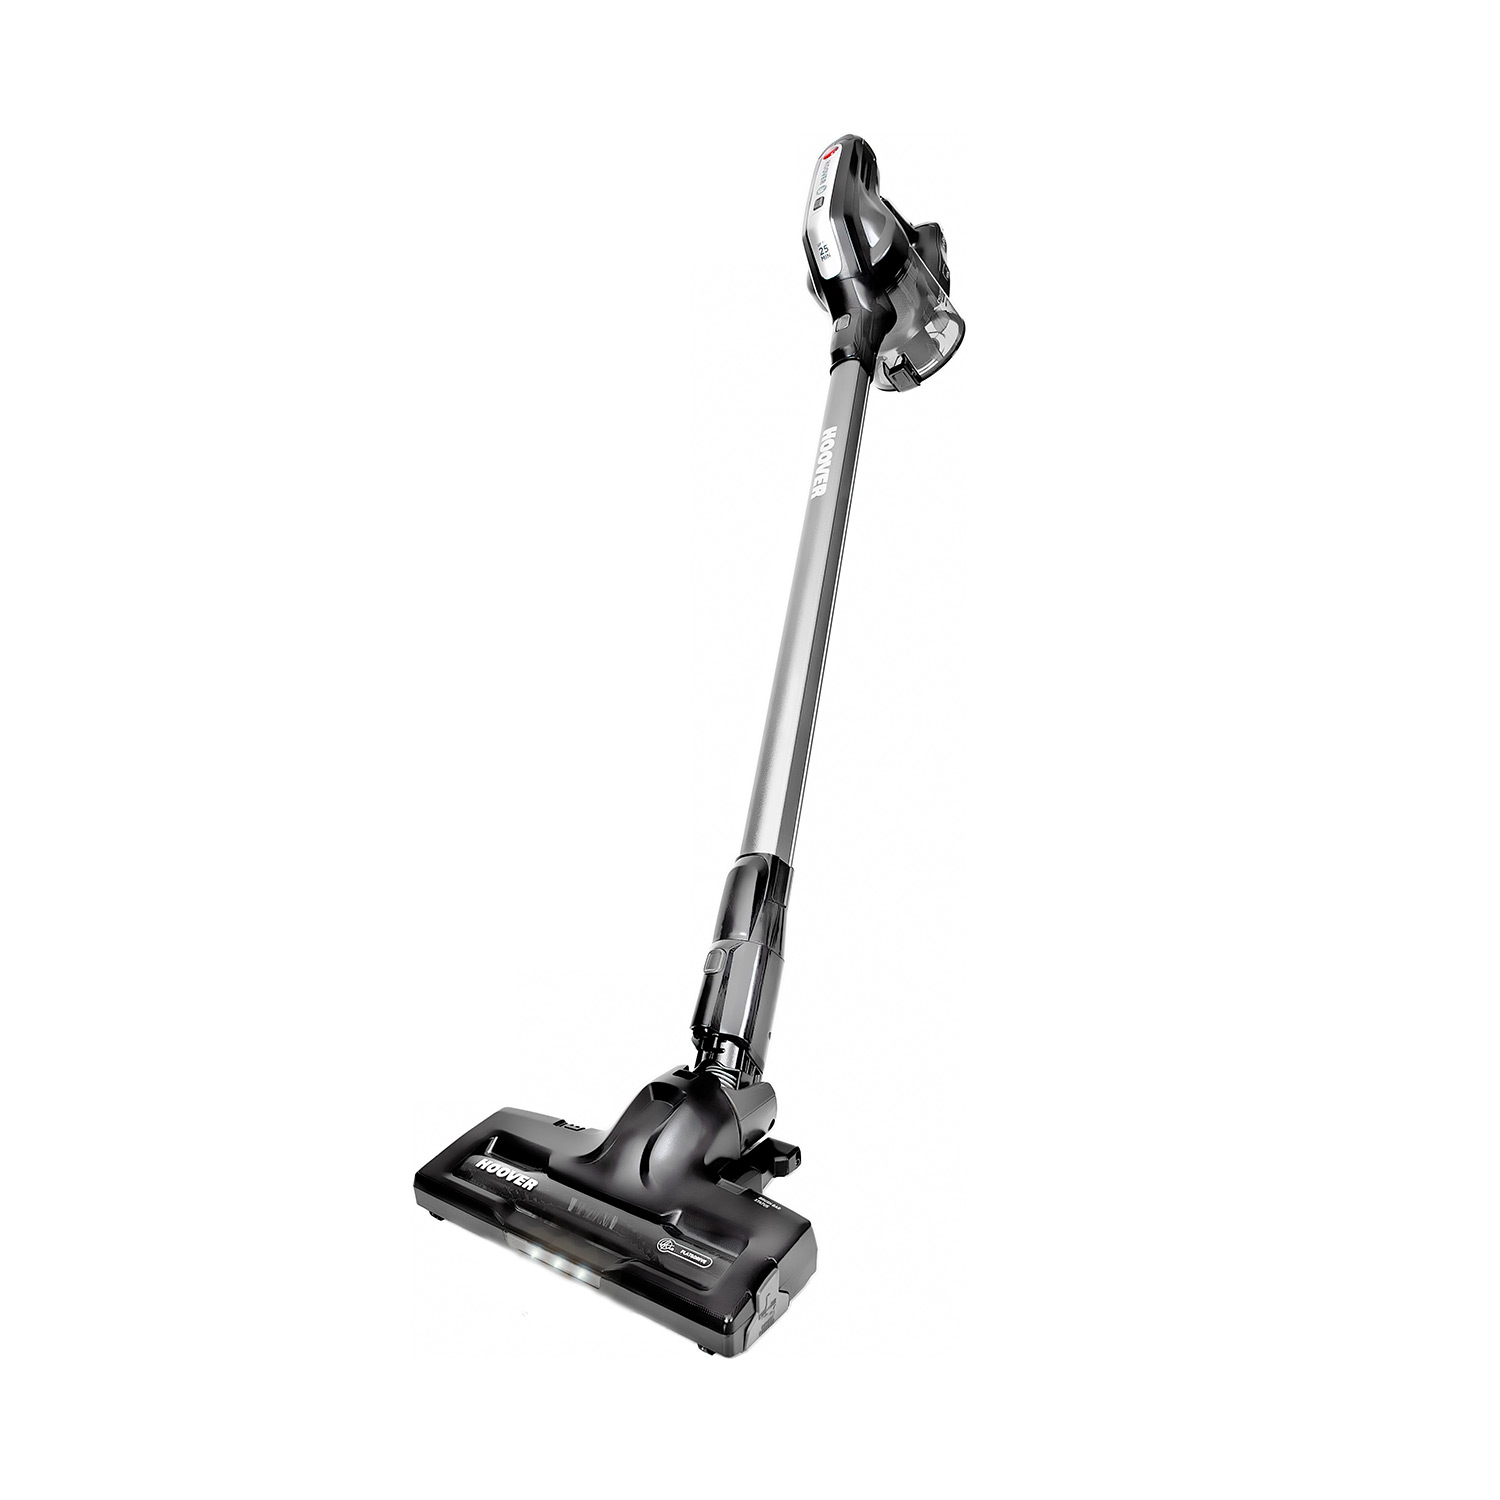 Hoover HF18GHI Cordless H Free Vacuum Cleaner for blog by Electrical Appliance warehouse on household appliances for independent living 